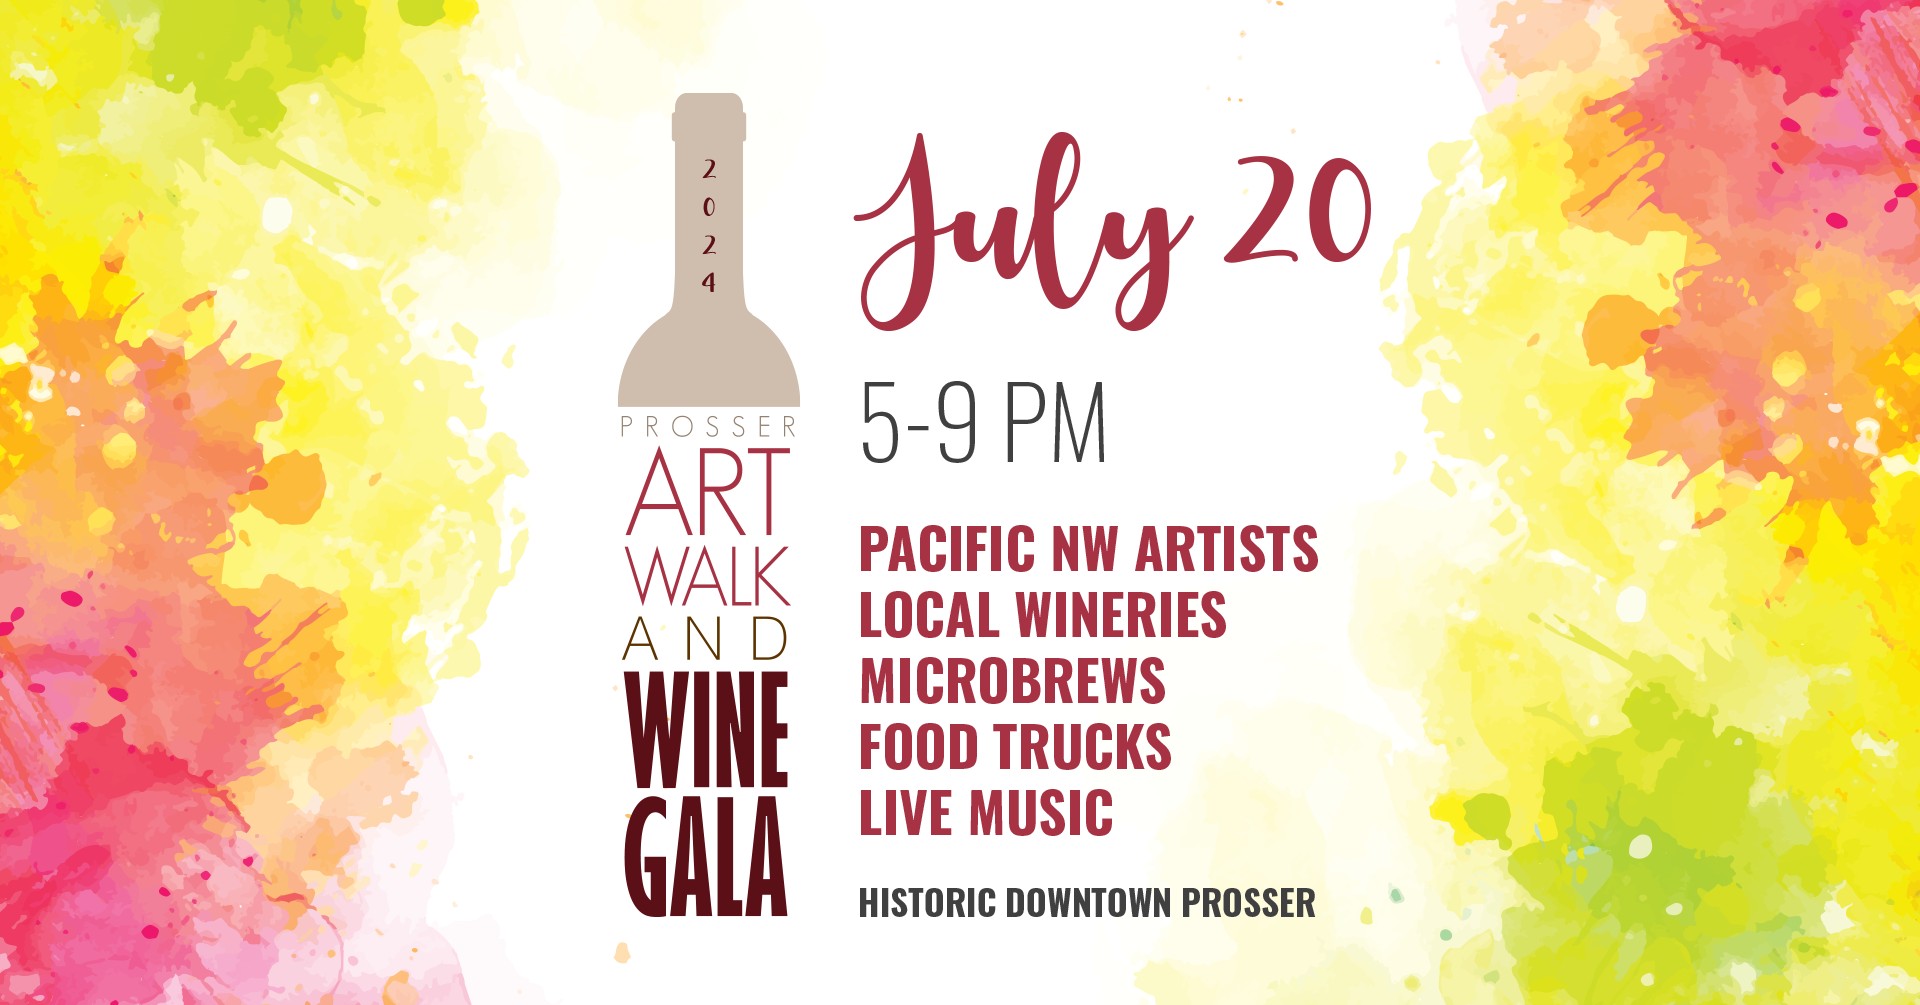 Flyer about Art Walk and Wine Gala